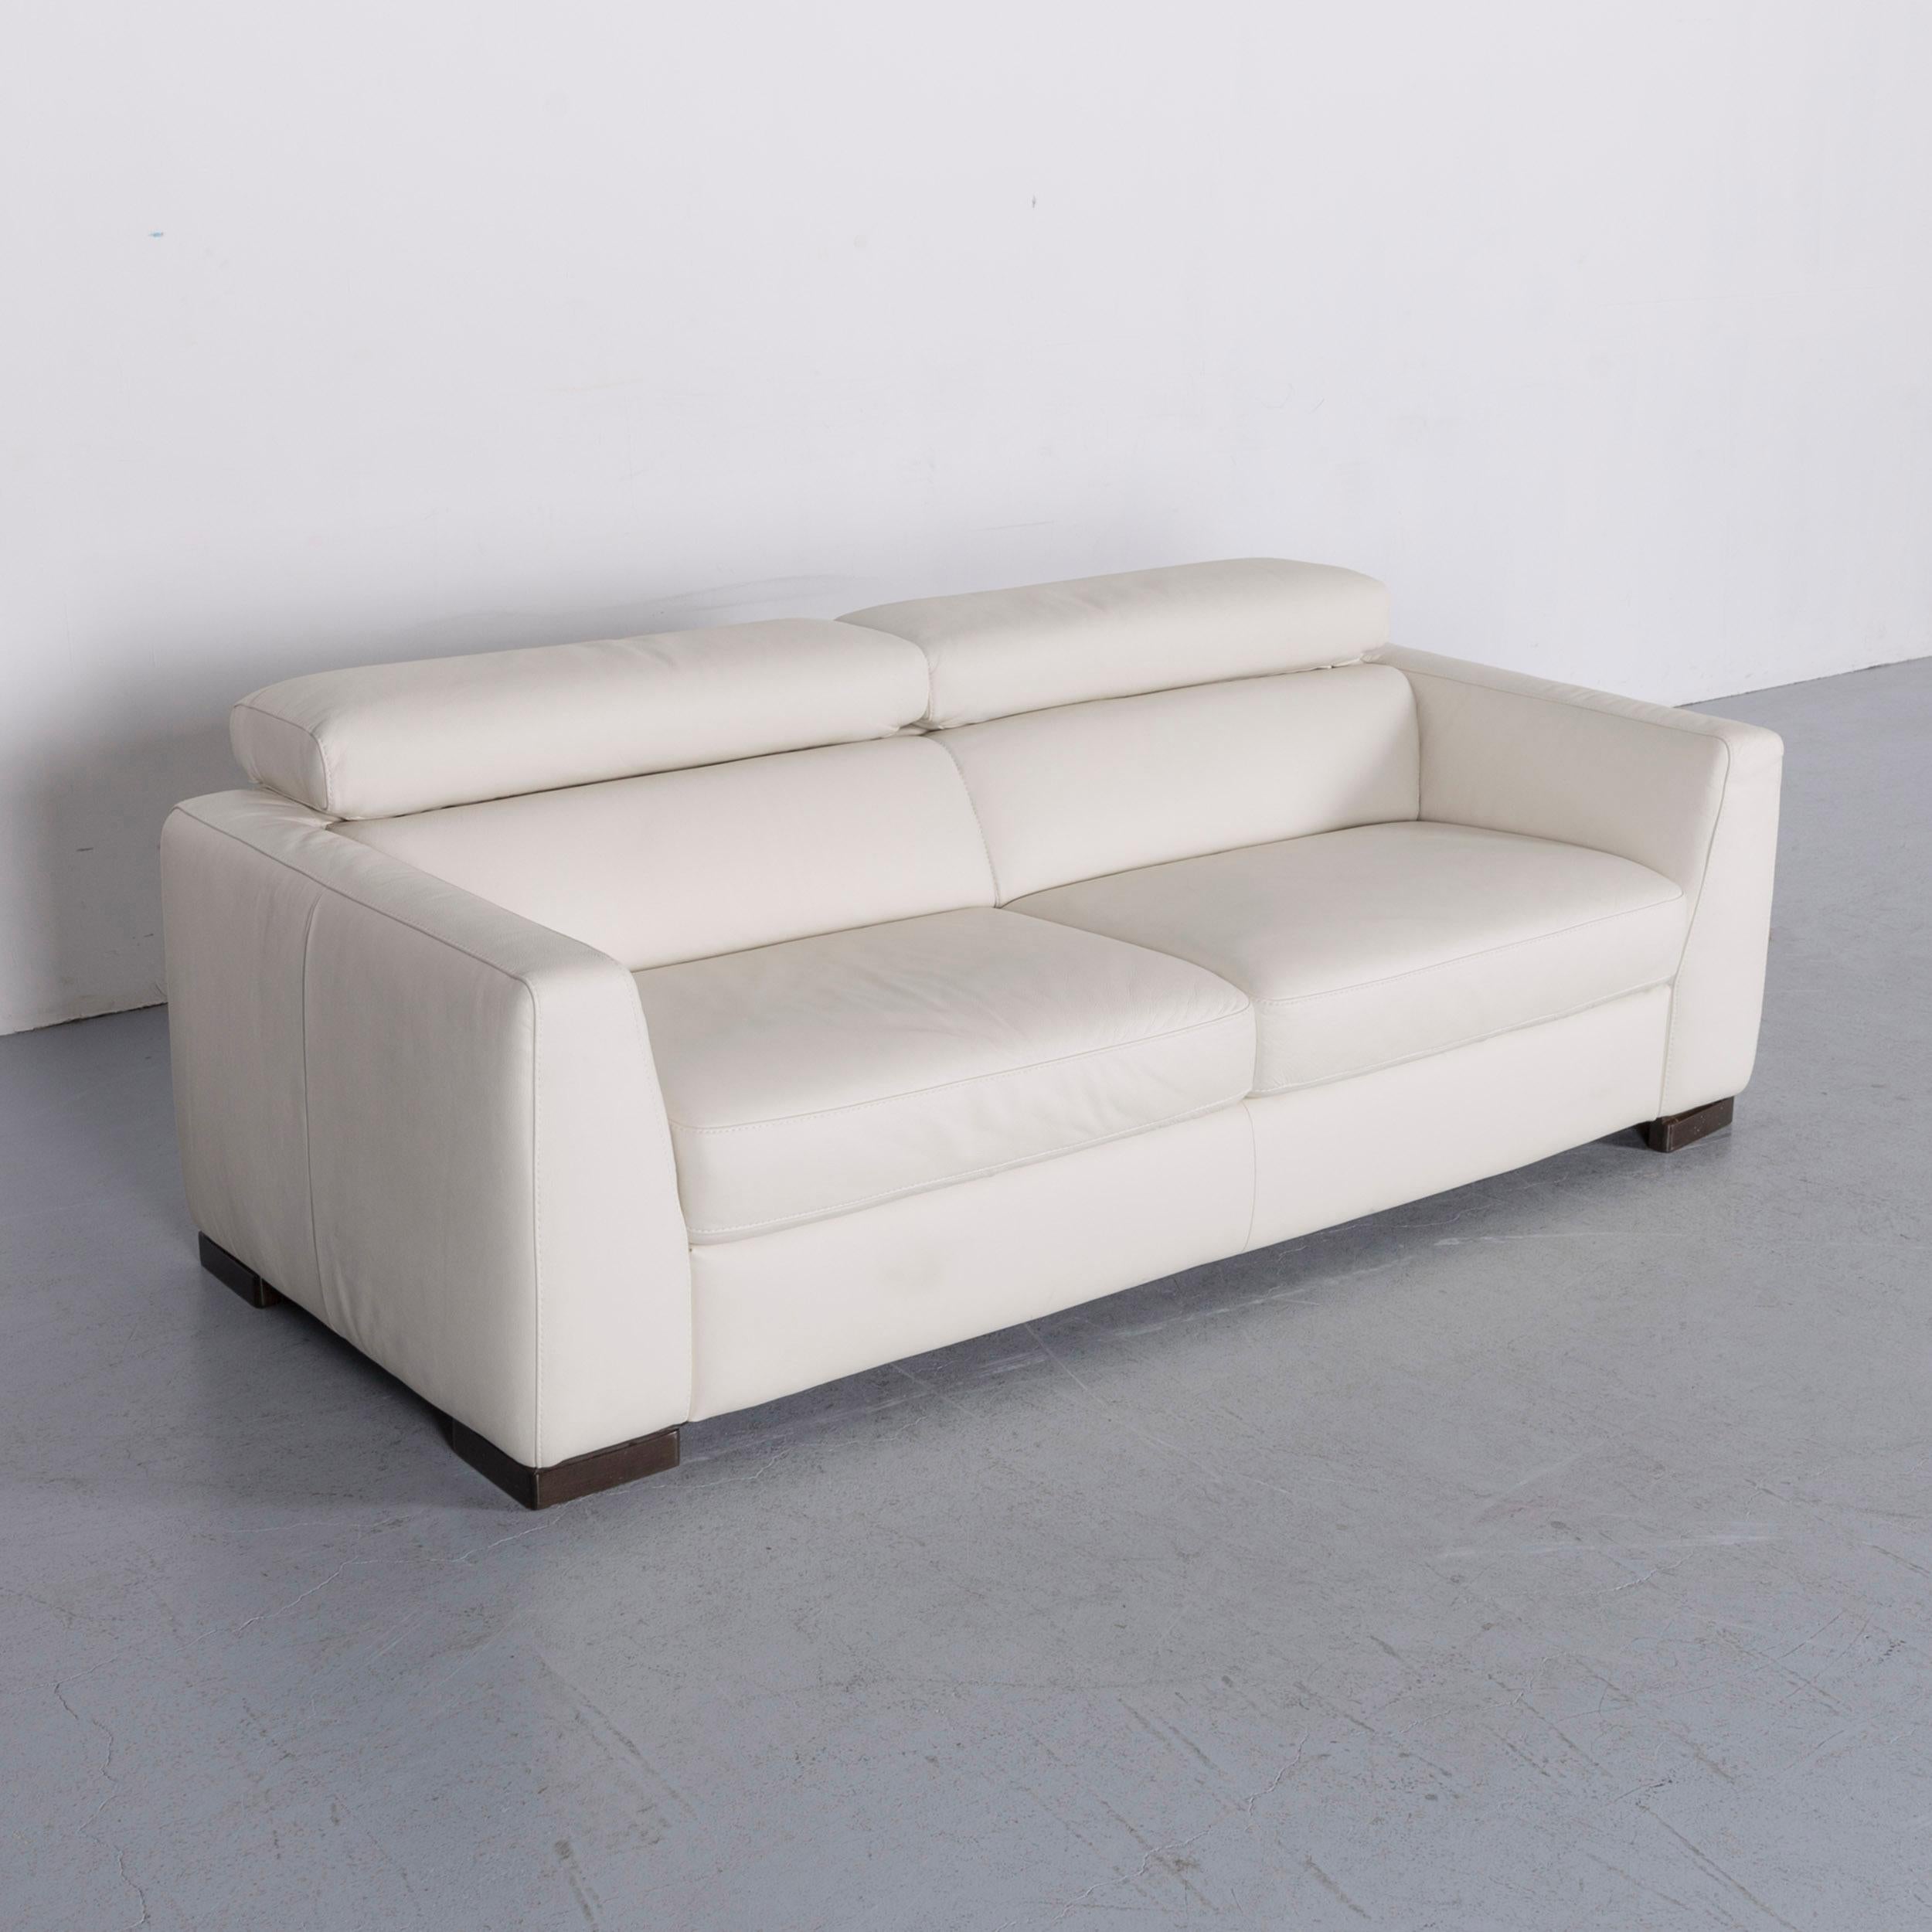 Contemporary Italsofa Designer Leather Sofa Set Crème White Modern Two-Seat Three-Seat Couch